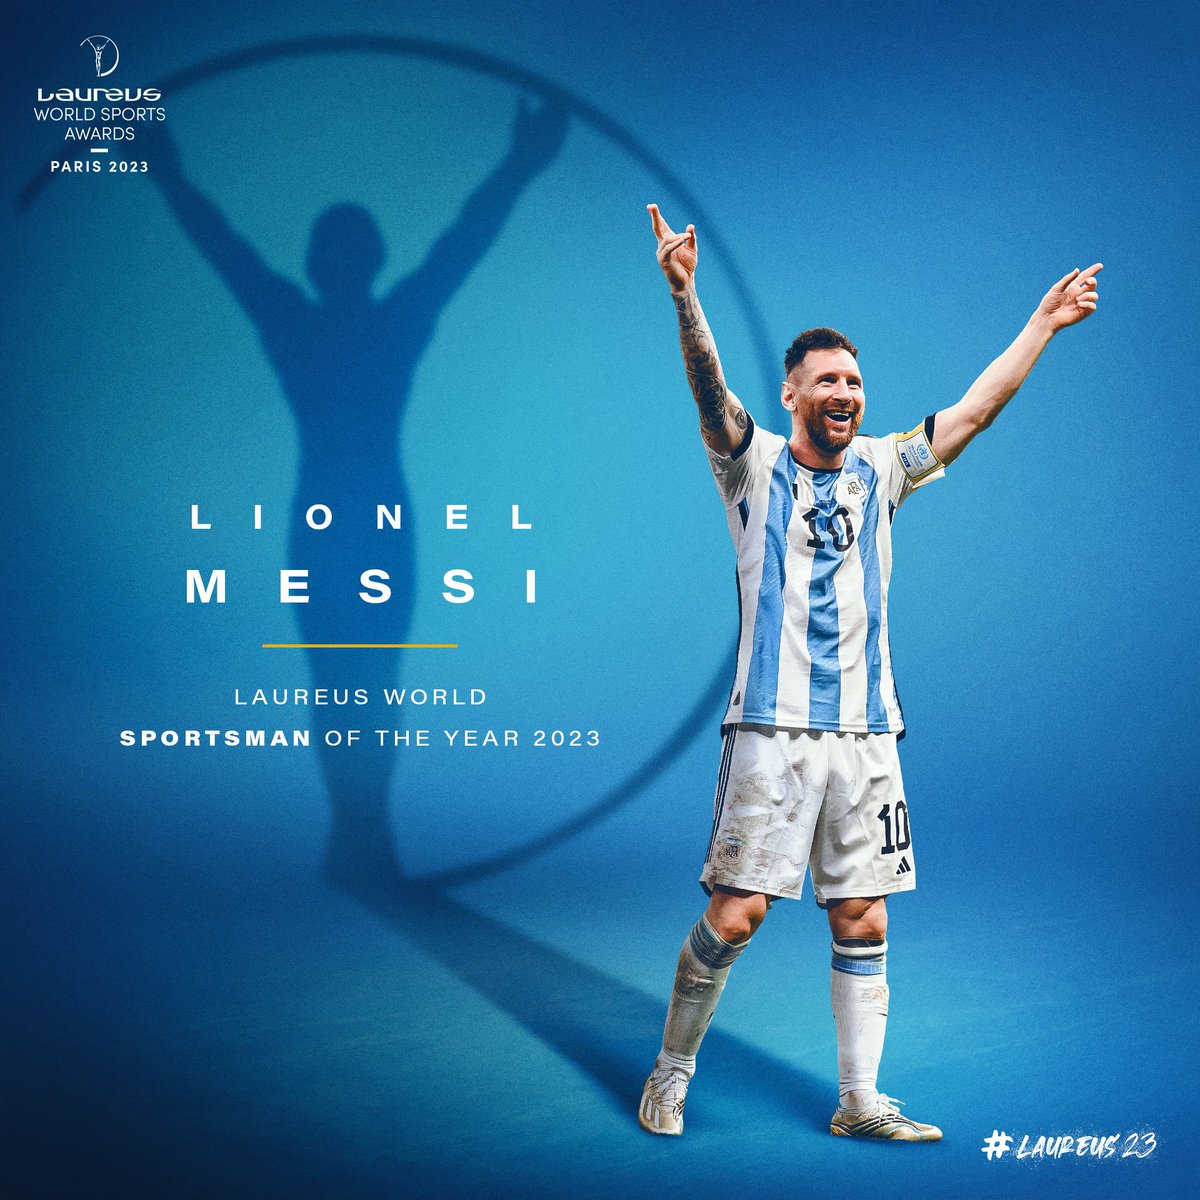 'I play a team sport and I've been able to achieve my biggest dream, which was to be a world champion with my team.'

🎙️ Lionel Messi - Laureus World Sportsman of the Year 2023

#Laureus23 | @Argentina